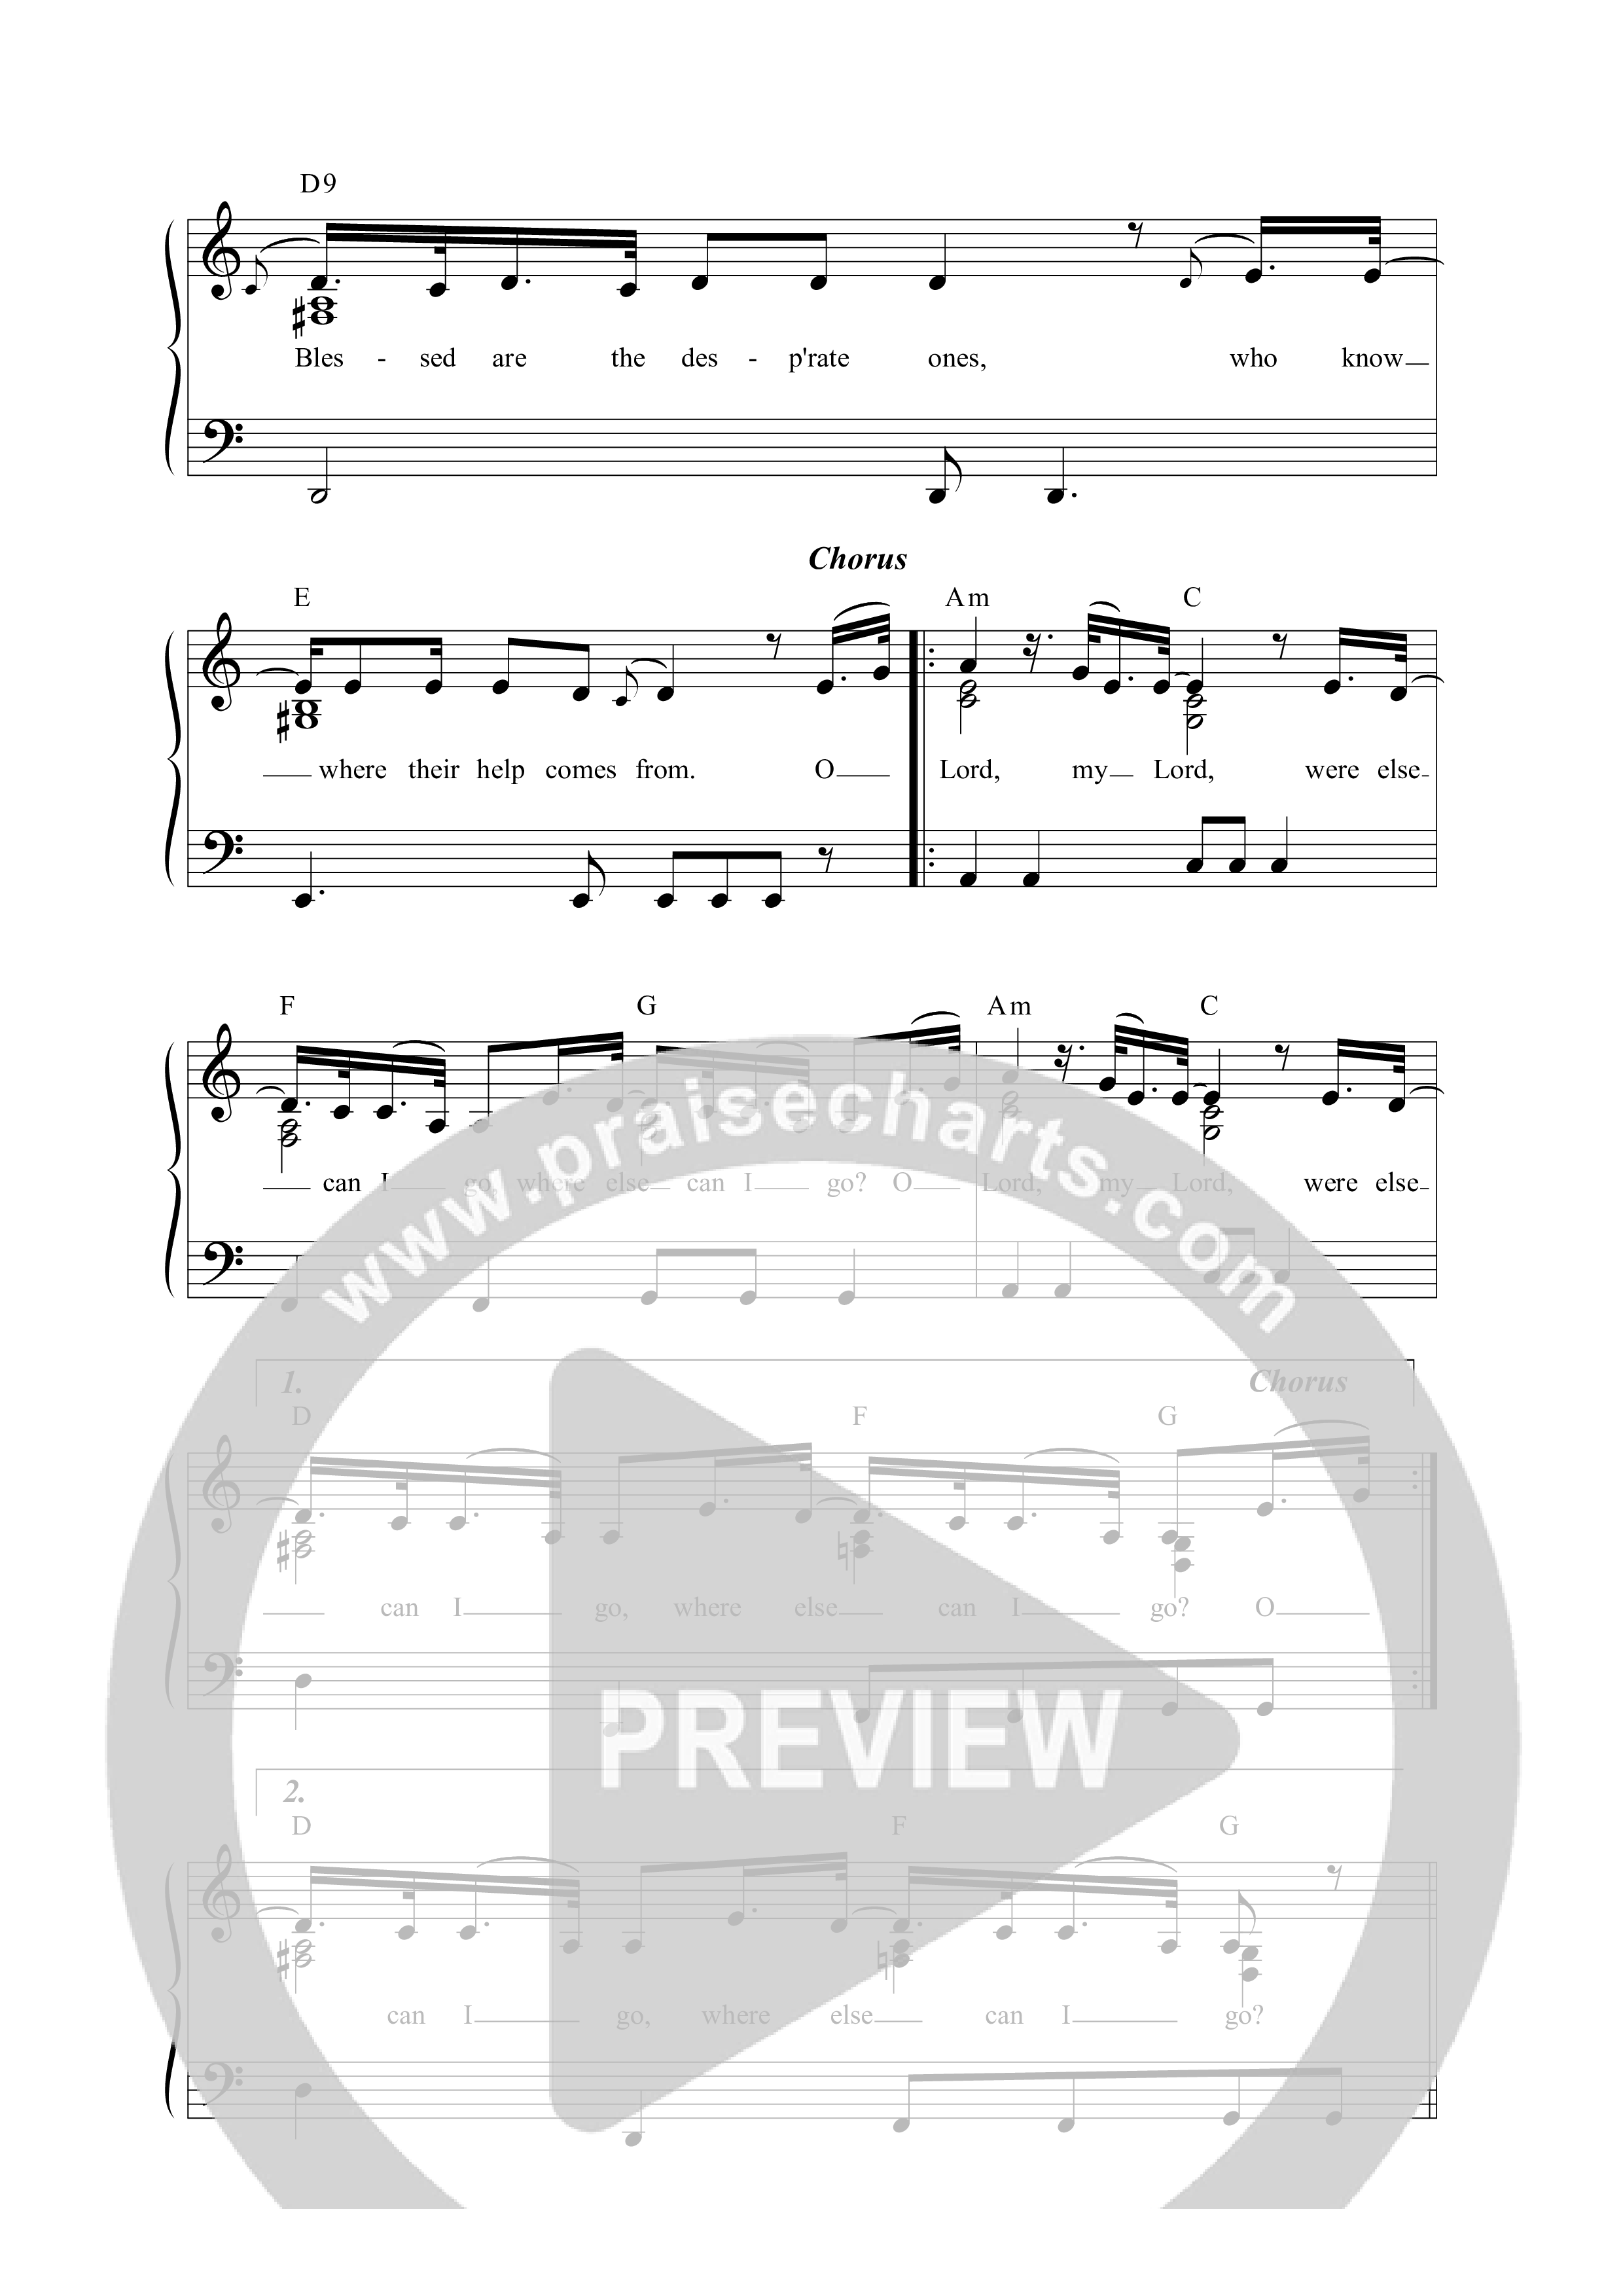 Where Else Can I Go Lead Sheet Melody (Anchor Hymns)